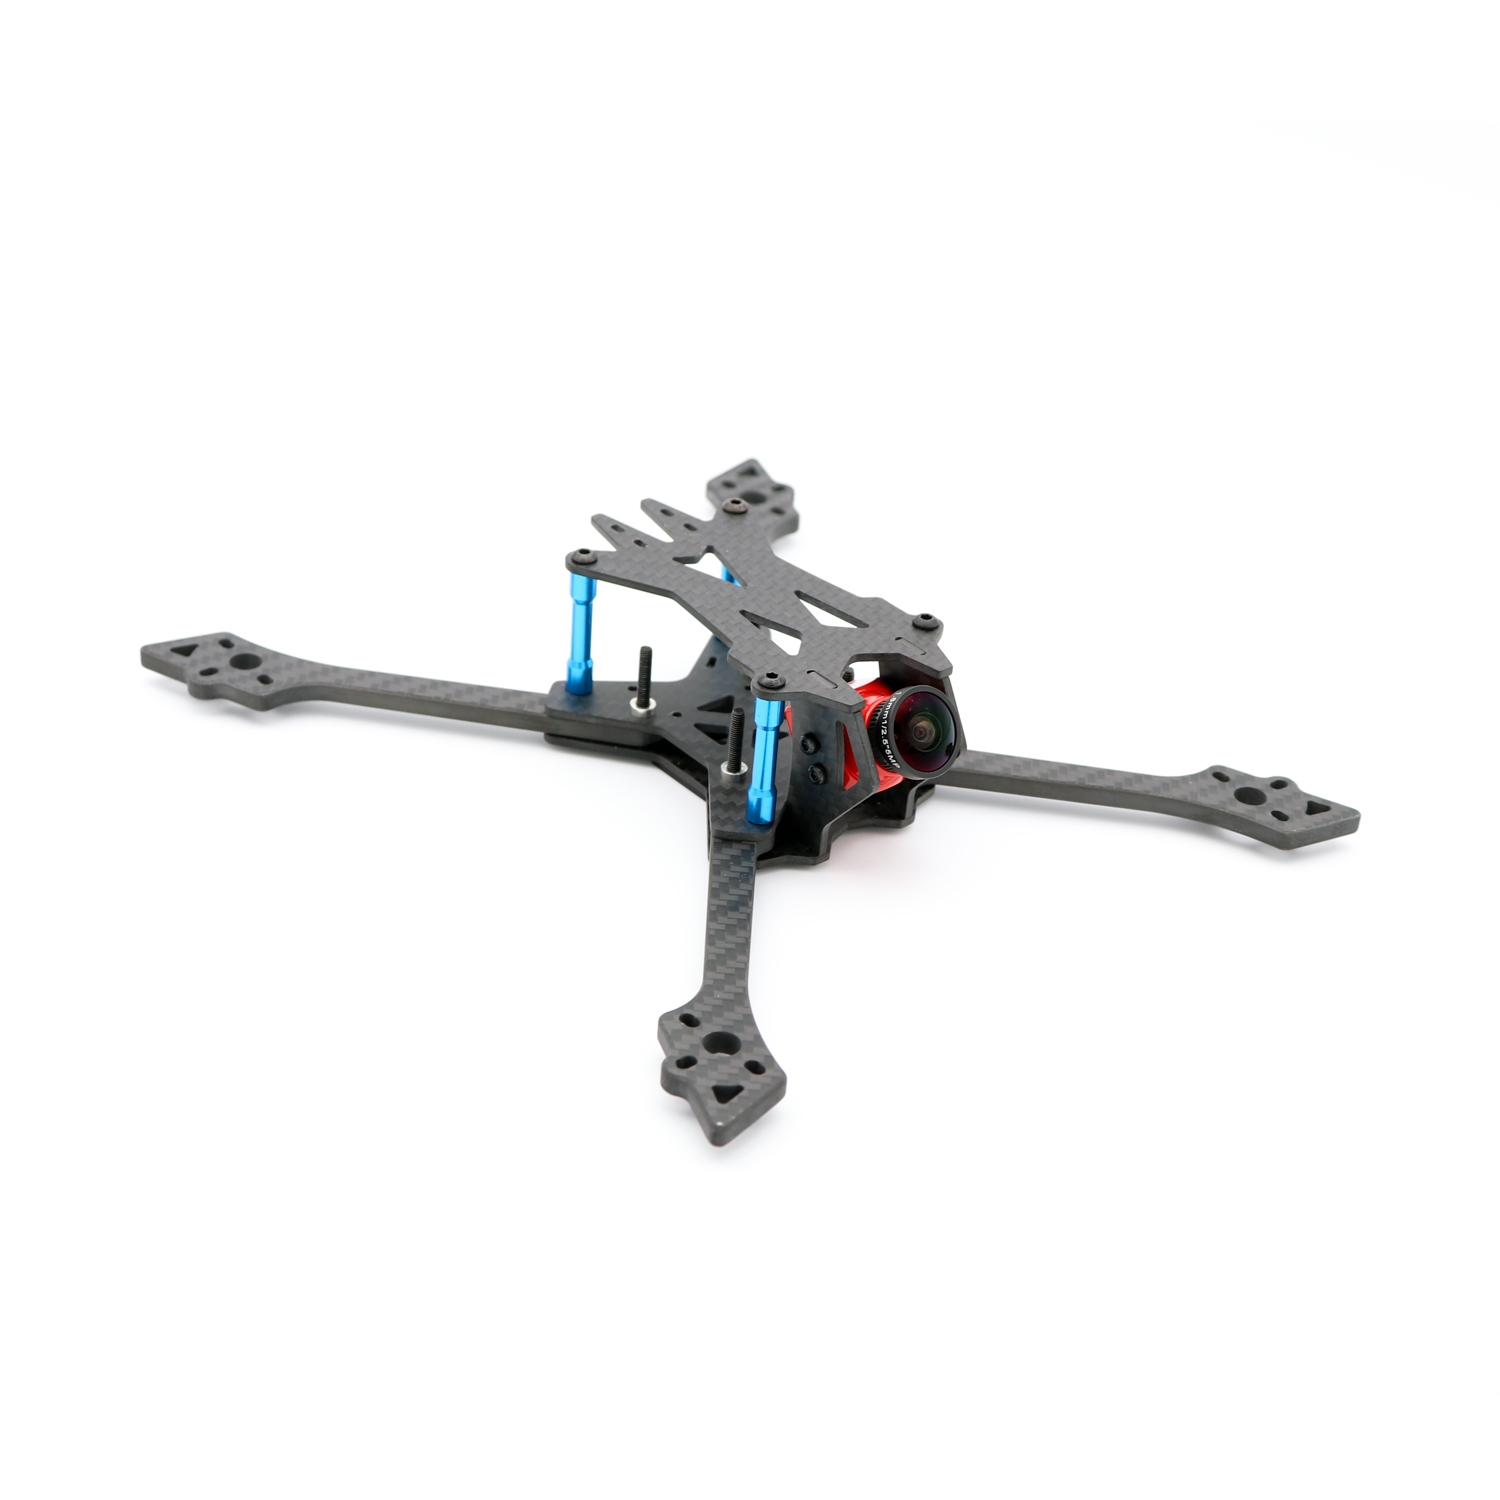 Pinkee MX-218 218mm Wheelbase 5 Inch 5mm Arm Carbon Fiber FPV Racing Frame Kit for RC Drone